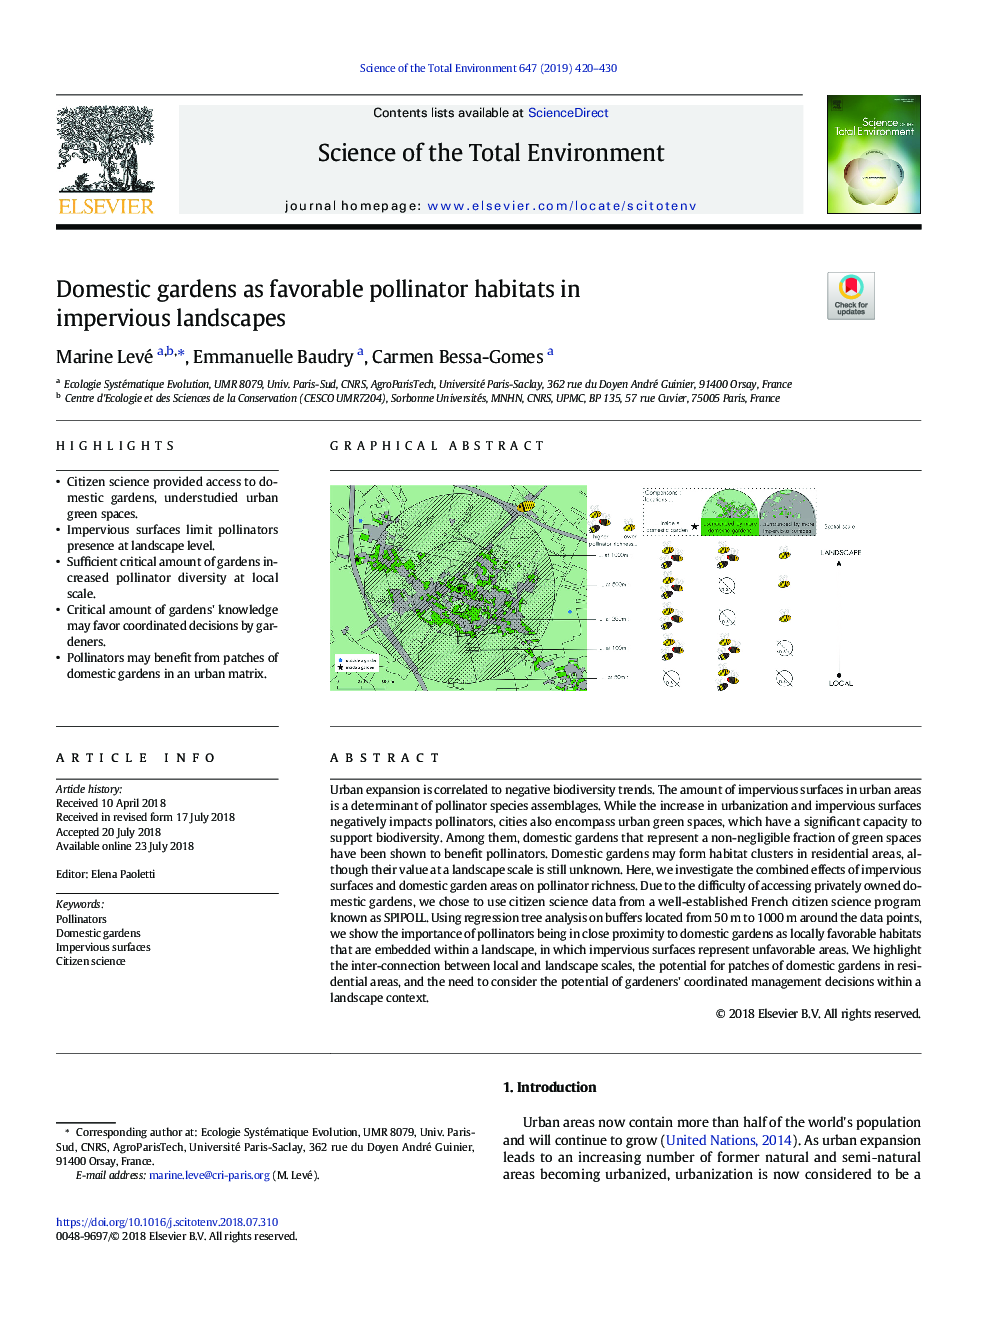 Domestic gardens as favorable pollinator habitats in impervious landscapes